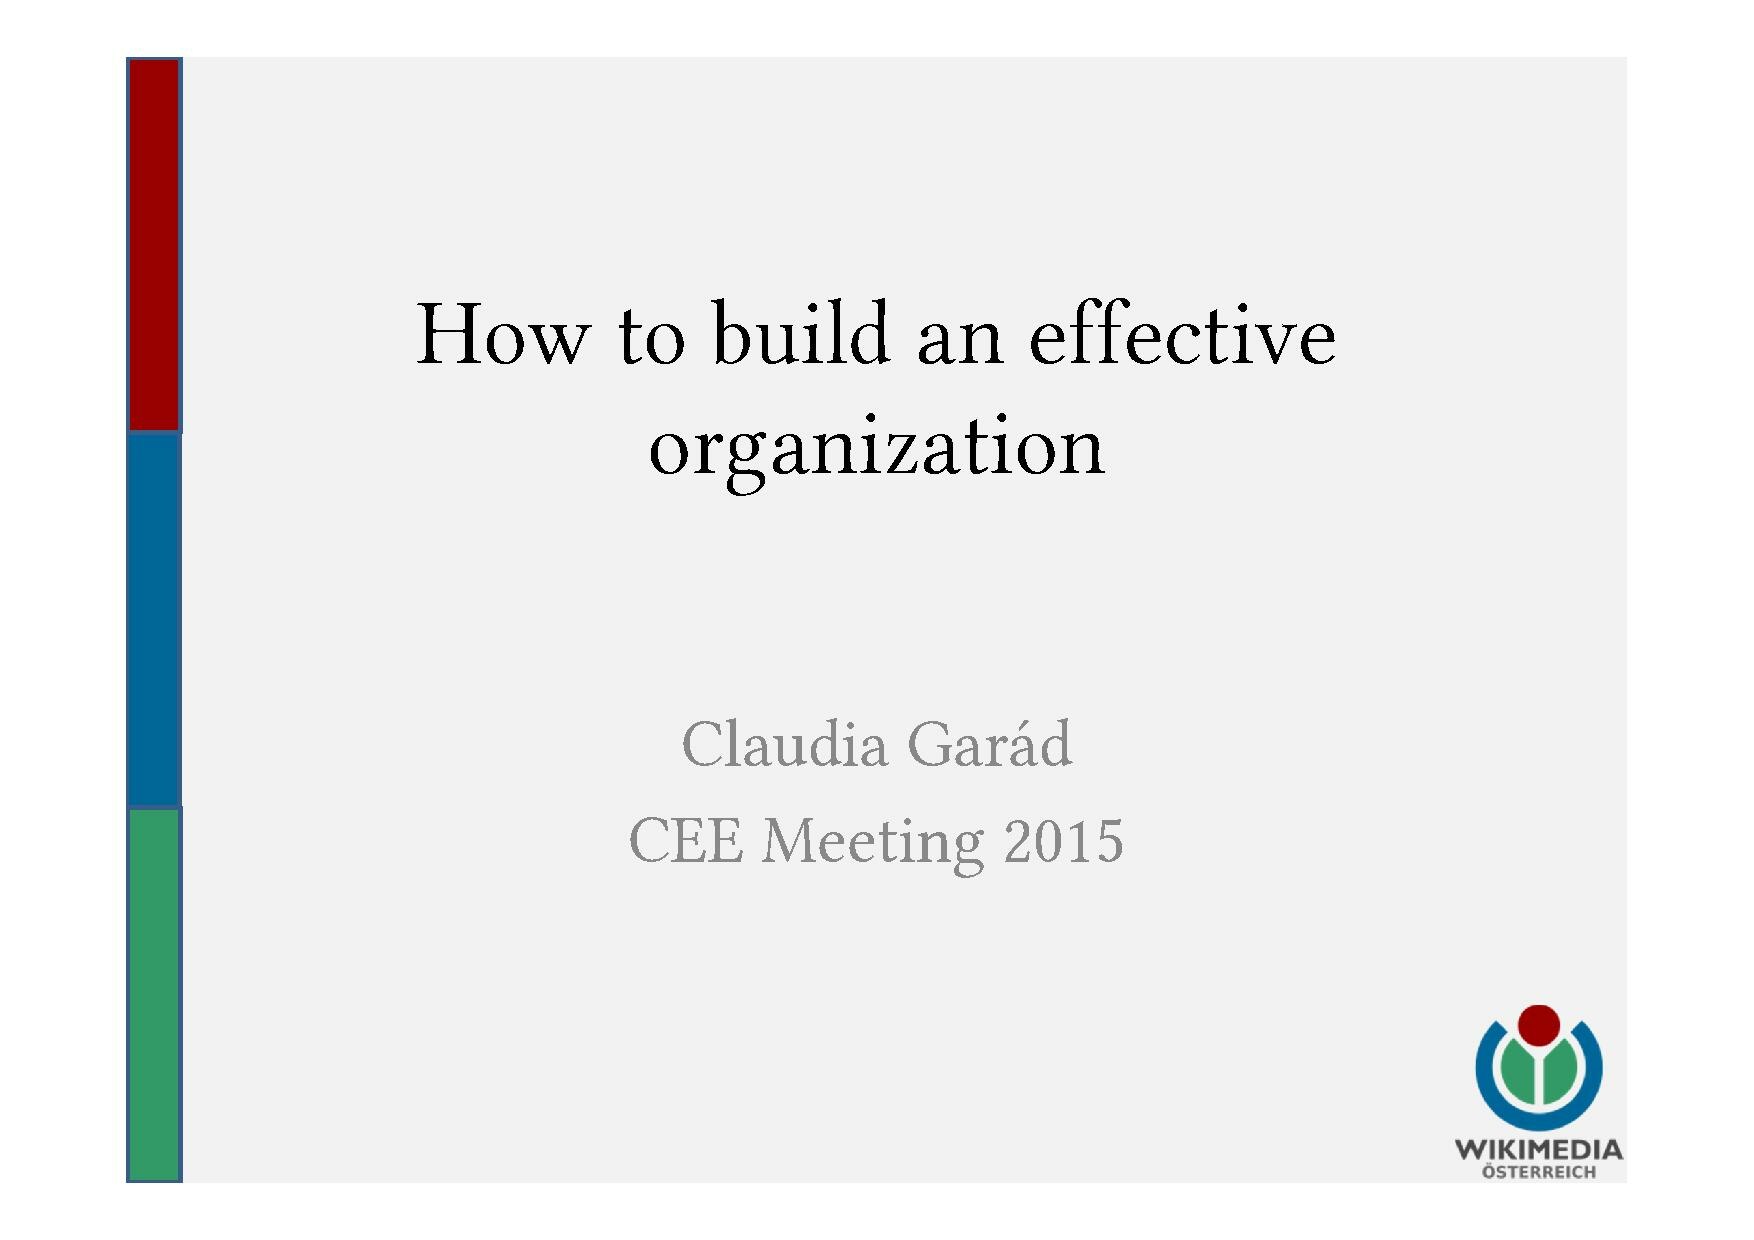 Presentation on organizational development in the context of the CEE meeting 2015